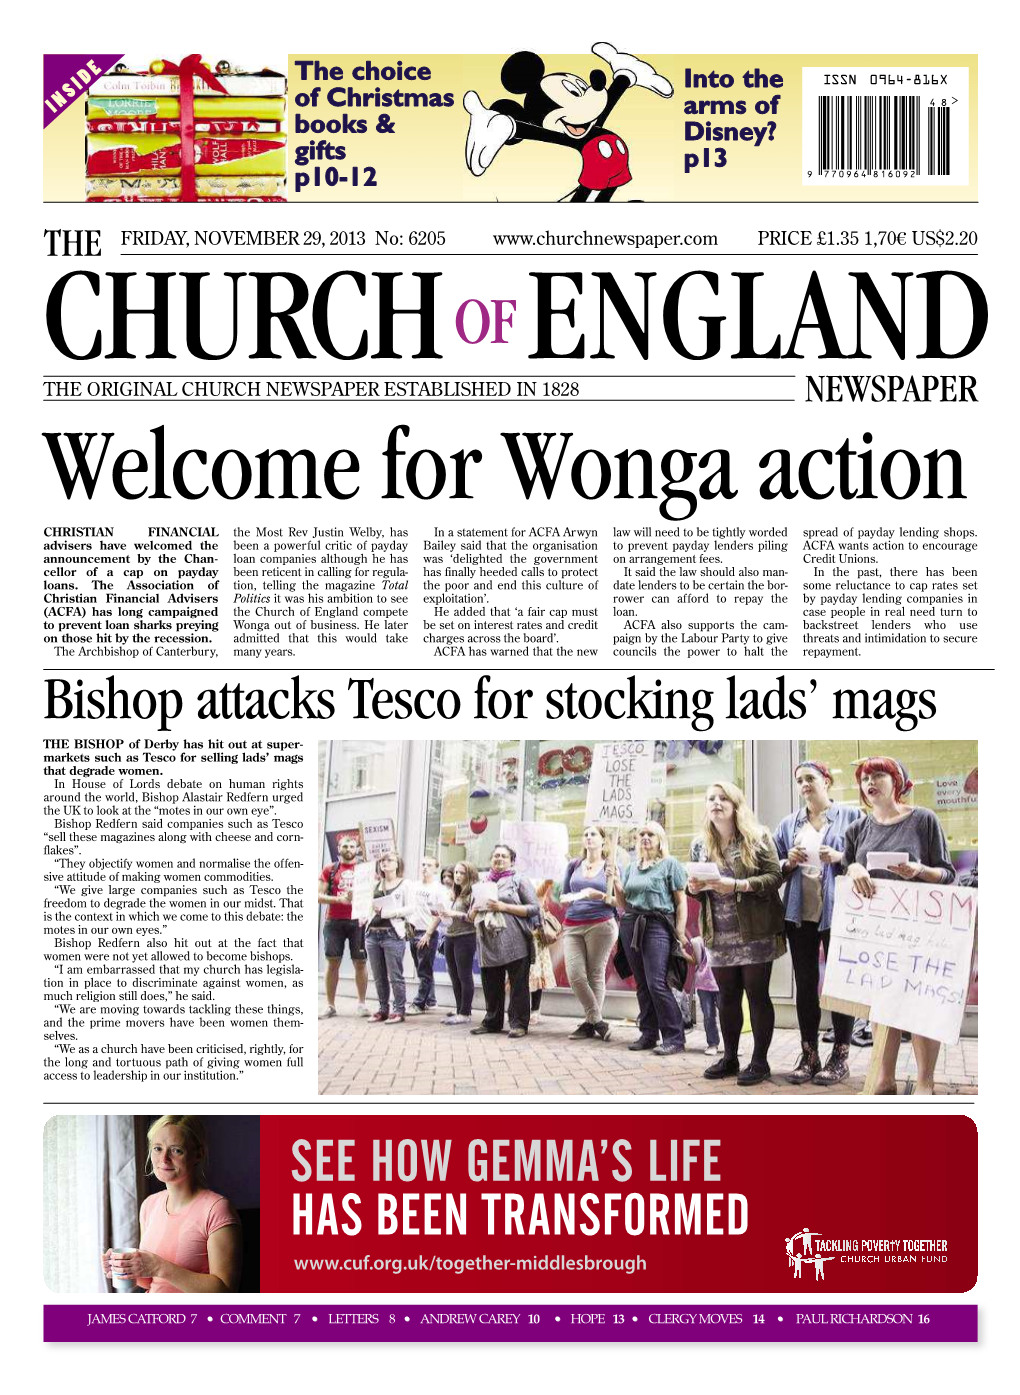 Bishop Attacks Tesco for Stocking Lads' Mags